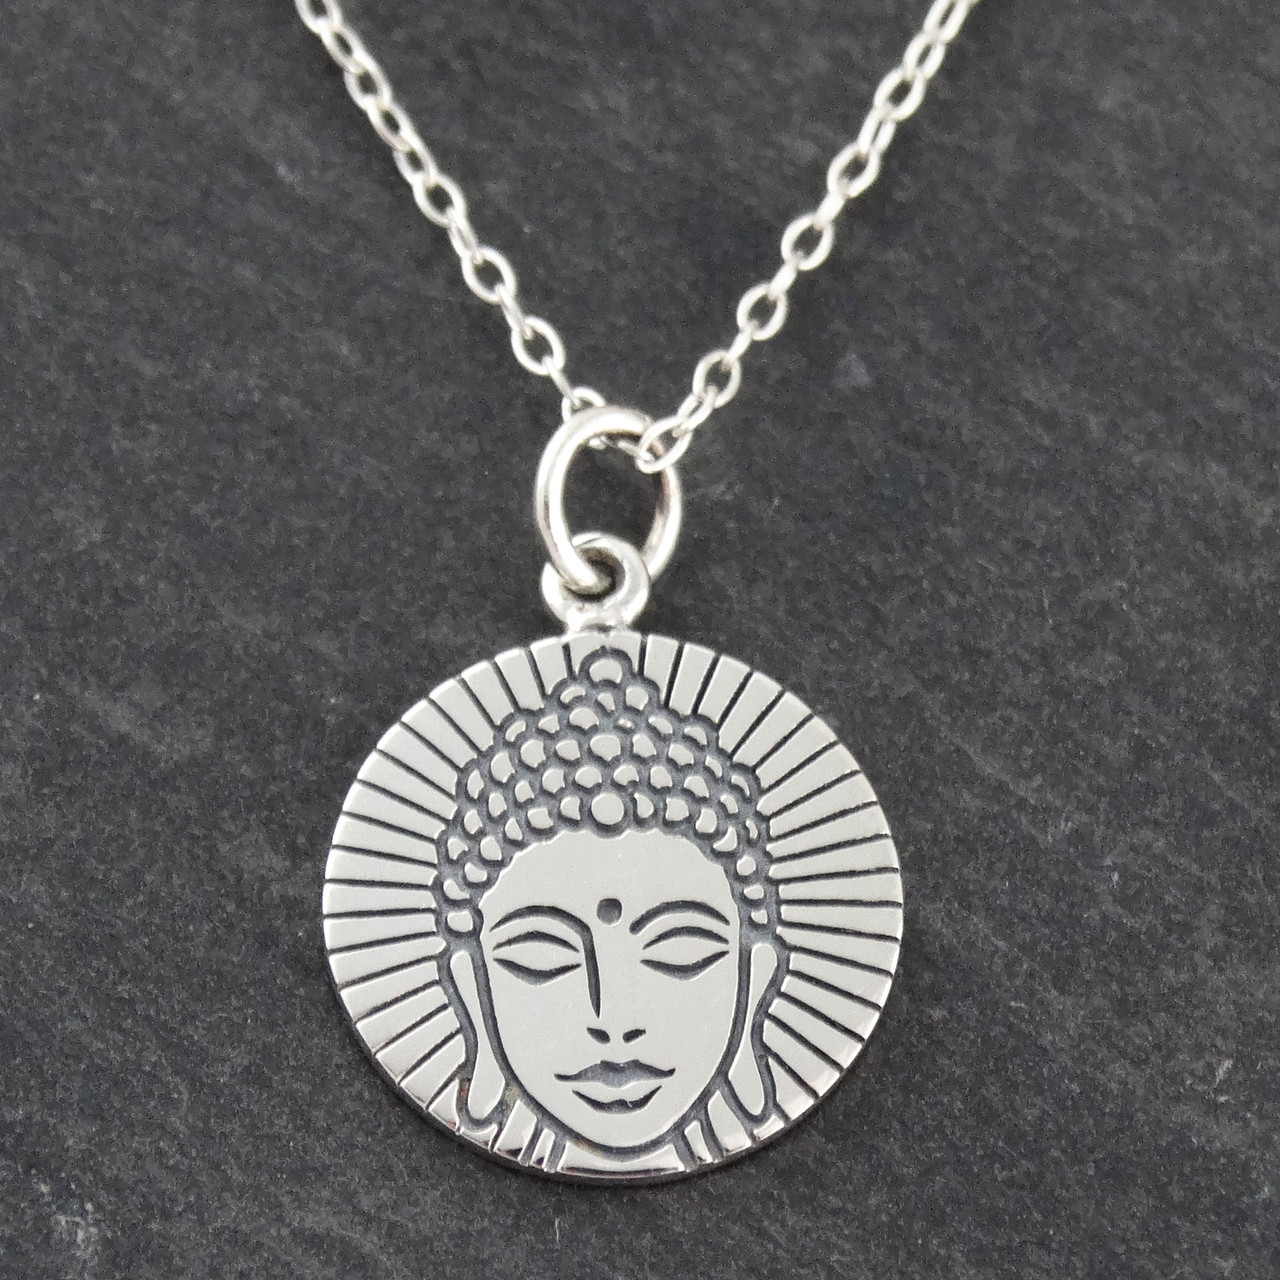 Buddha Necklace in 925 Sterling Silver | FashionJunkie4Life